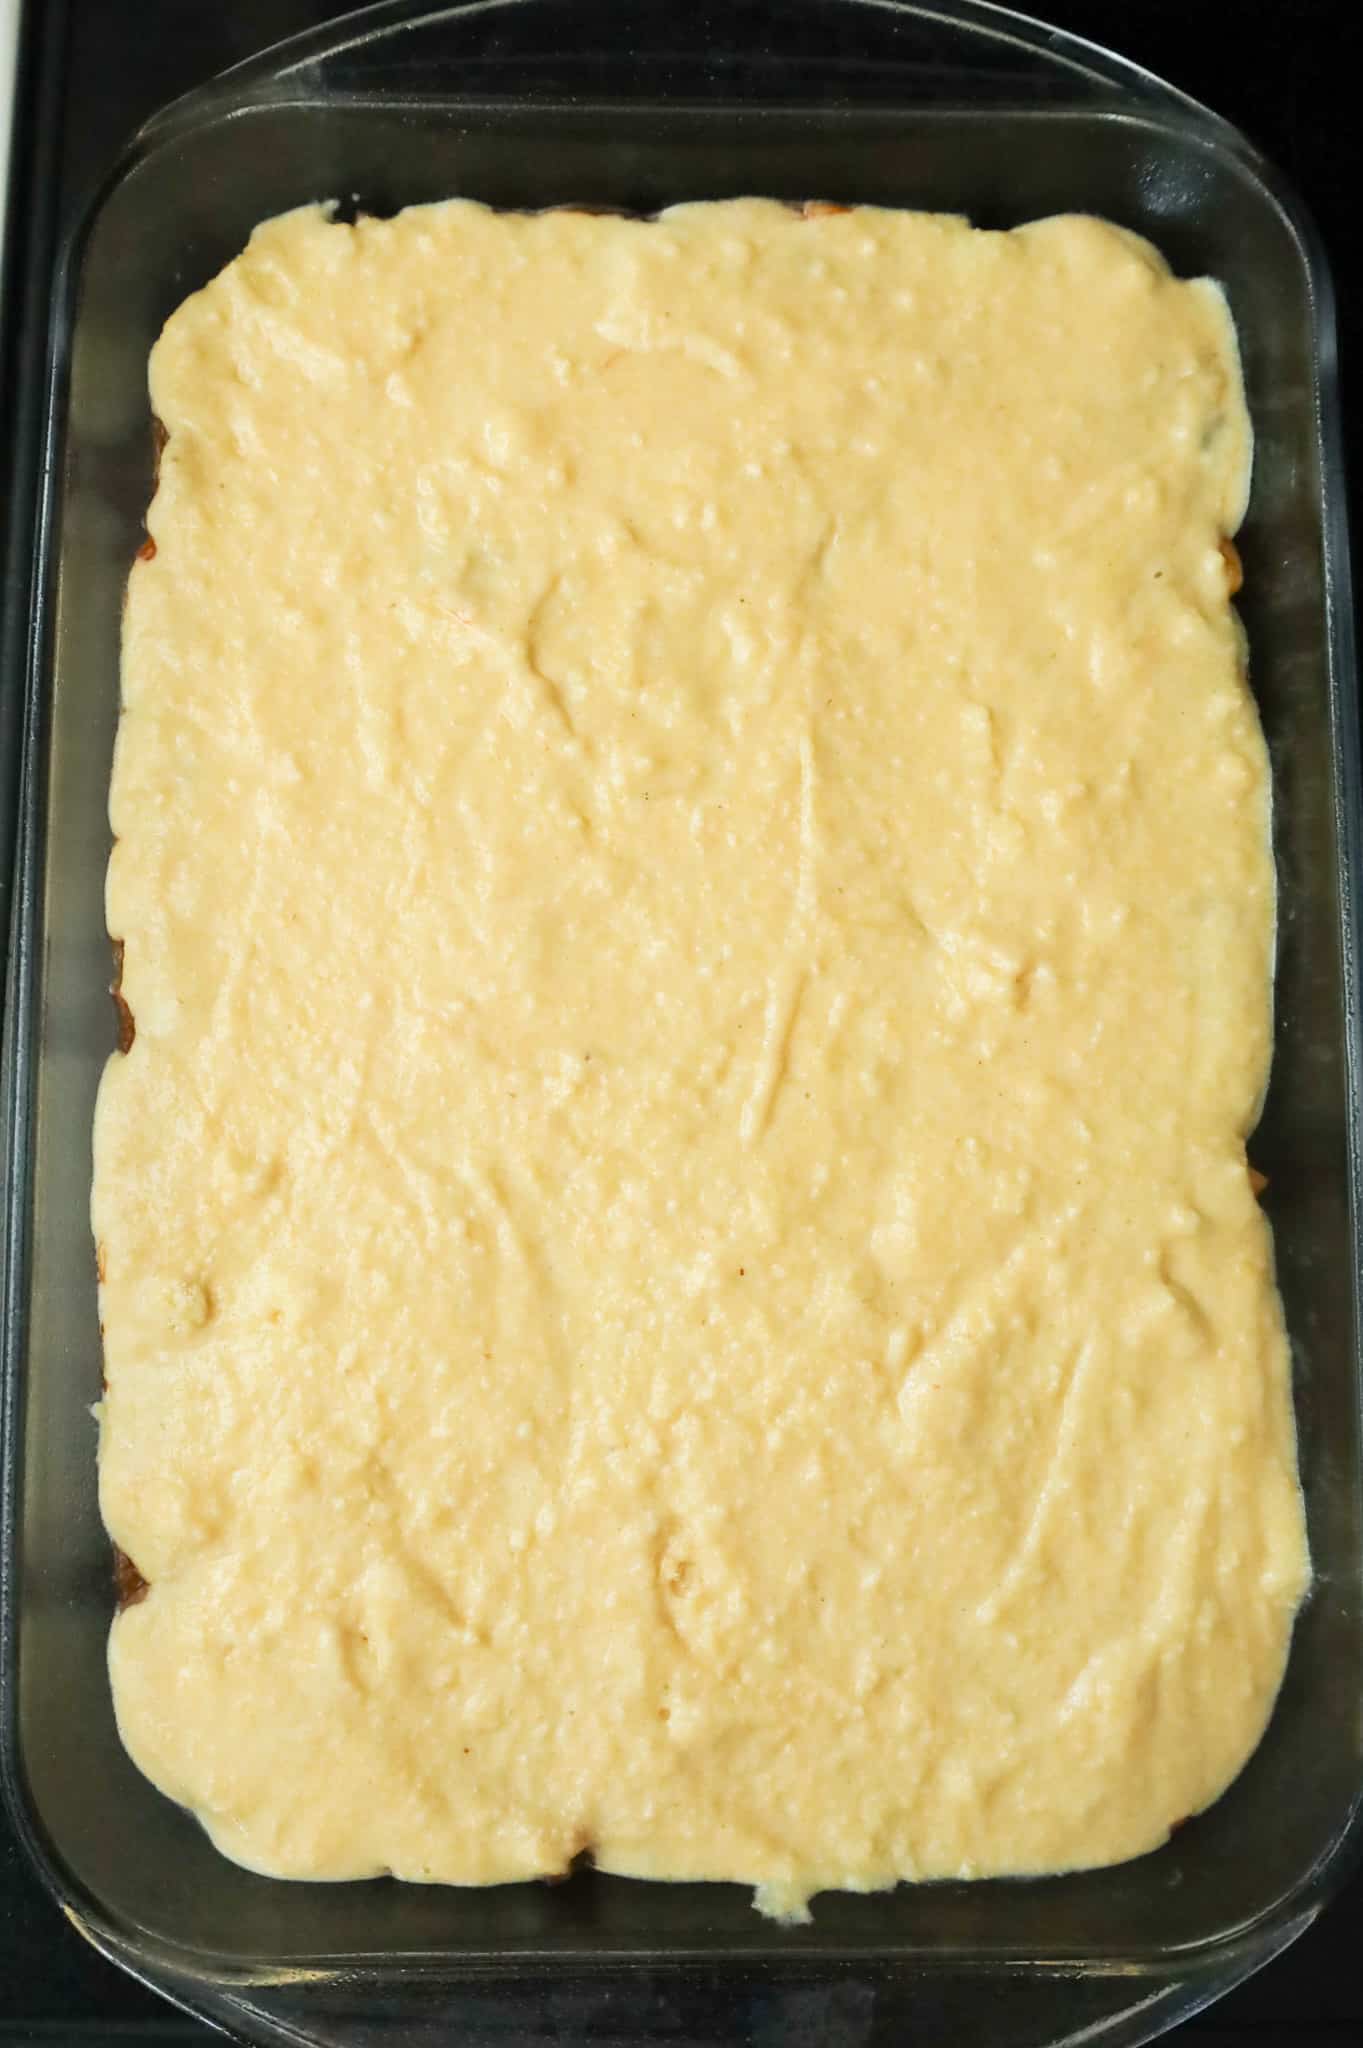 jiffy cornbread batter on top of ground beef mixture in a baking pan